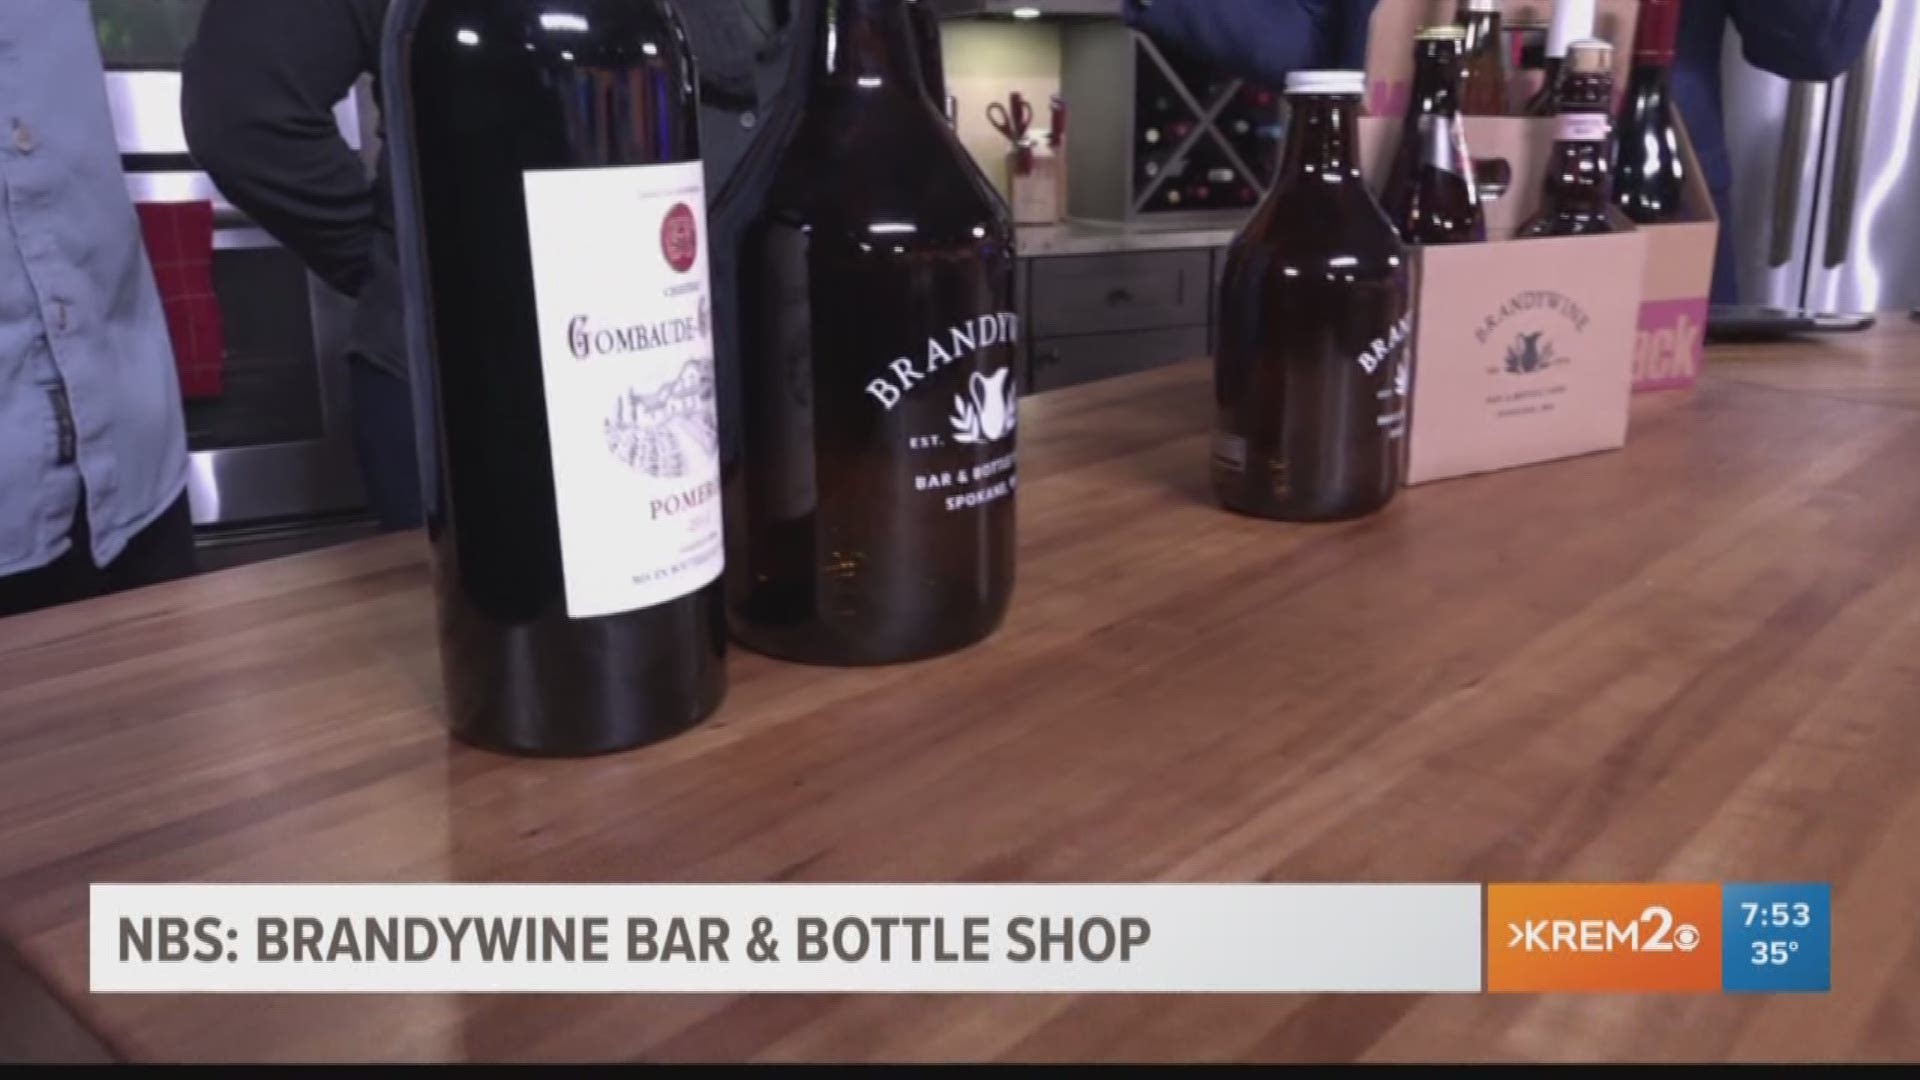 Caitlin Richardson and John McCormack from Brandywine Bar & Bottle Shop give KREM's Taylor Viydo and Evan Noorani a look at their new business.